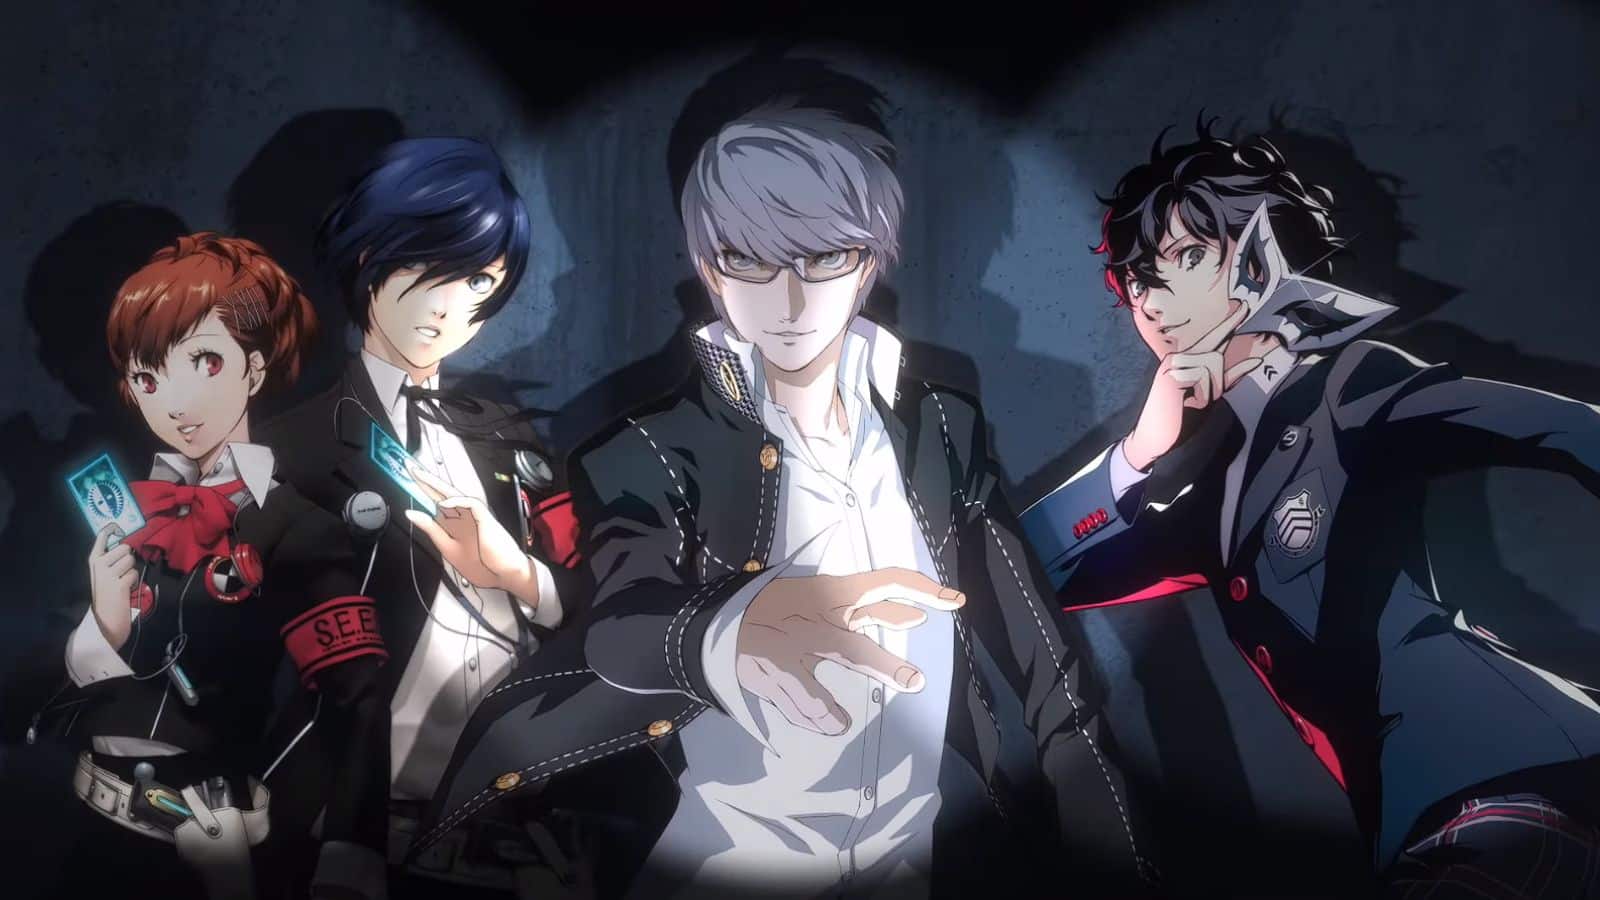 An image of Persona 5, 4 and 3 protagonists featured in the Xbox and Nintendo Switch releases.